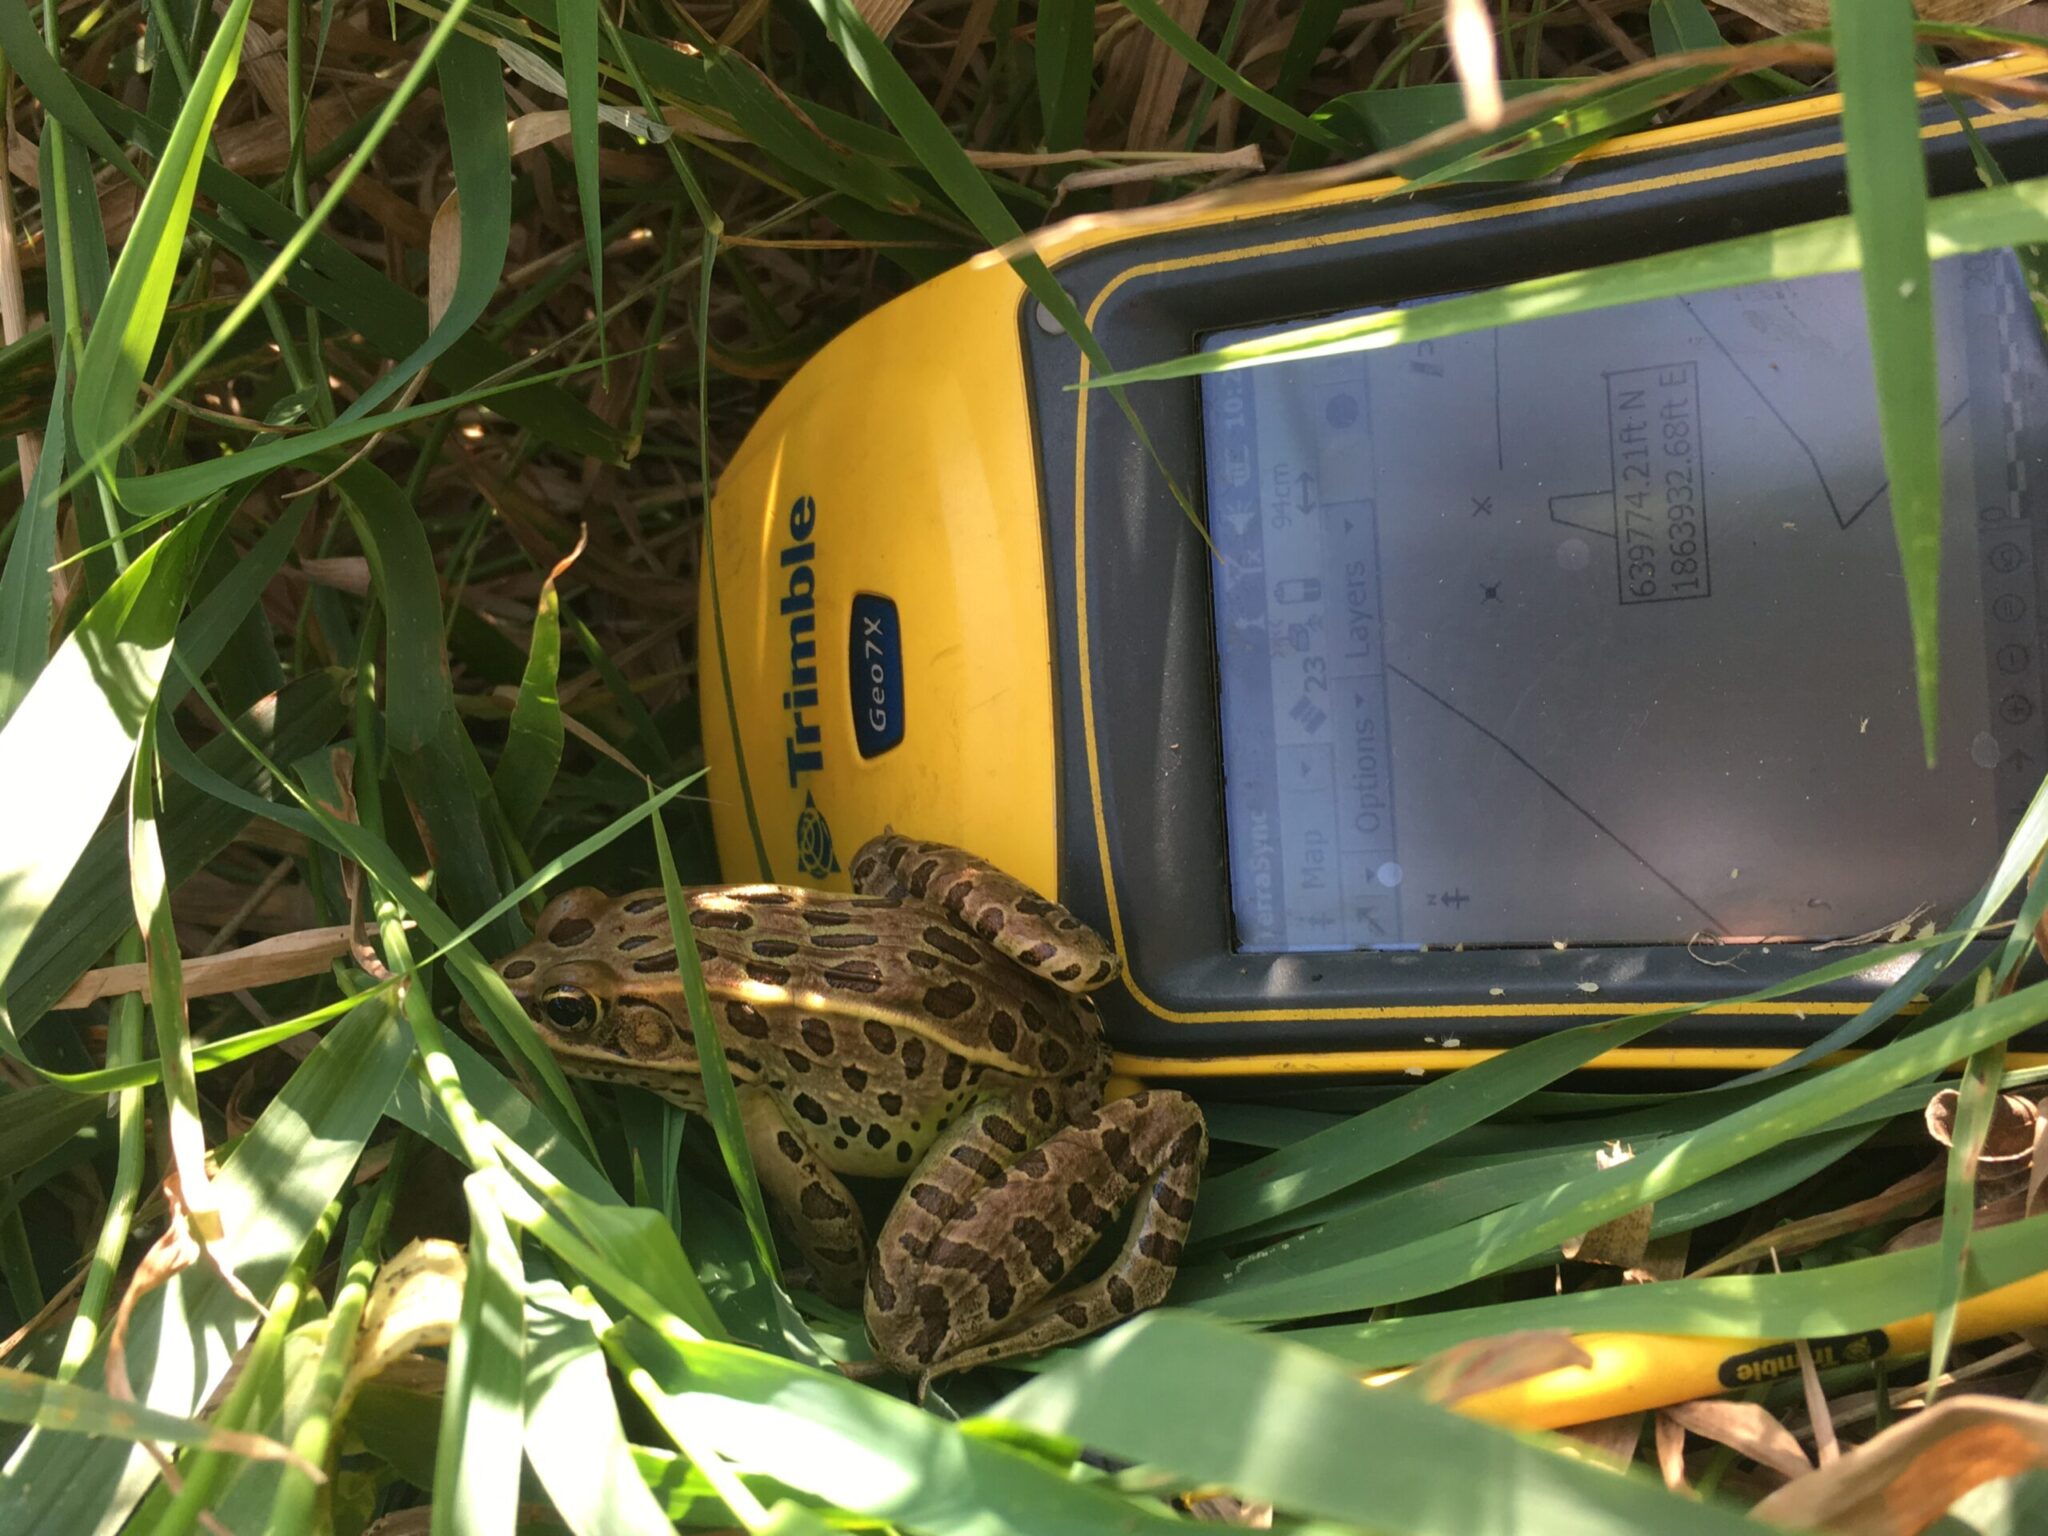 leopard frog and trimble gps